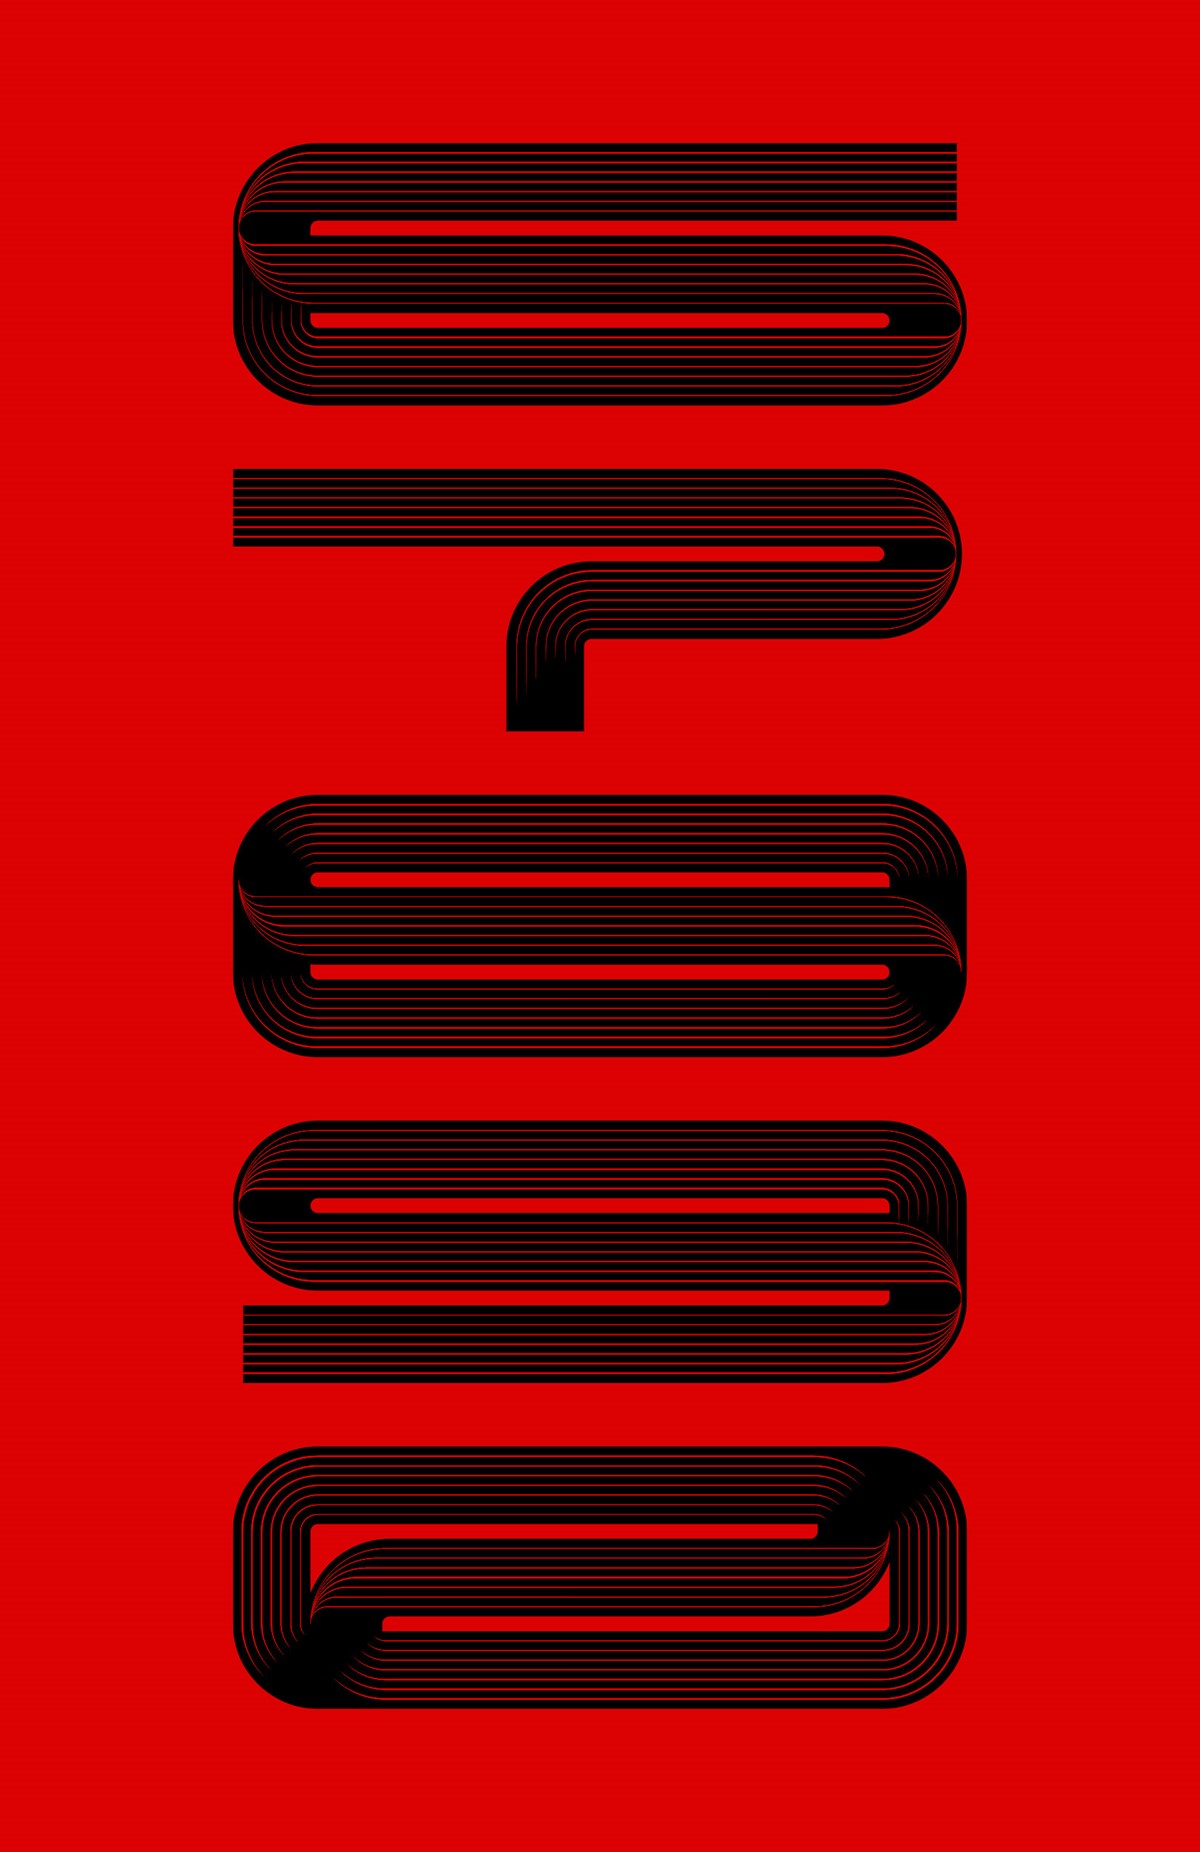 1896. Type experiment. Horizontal 6-0. Bespoke typography design by Superfried.